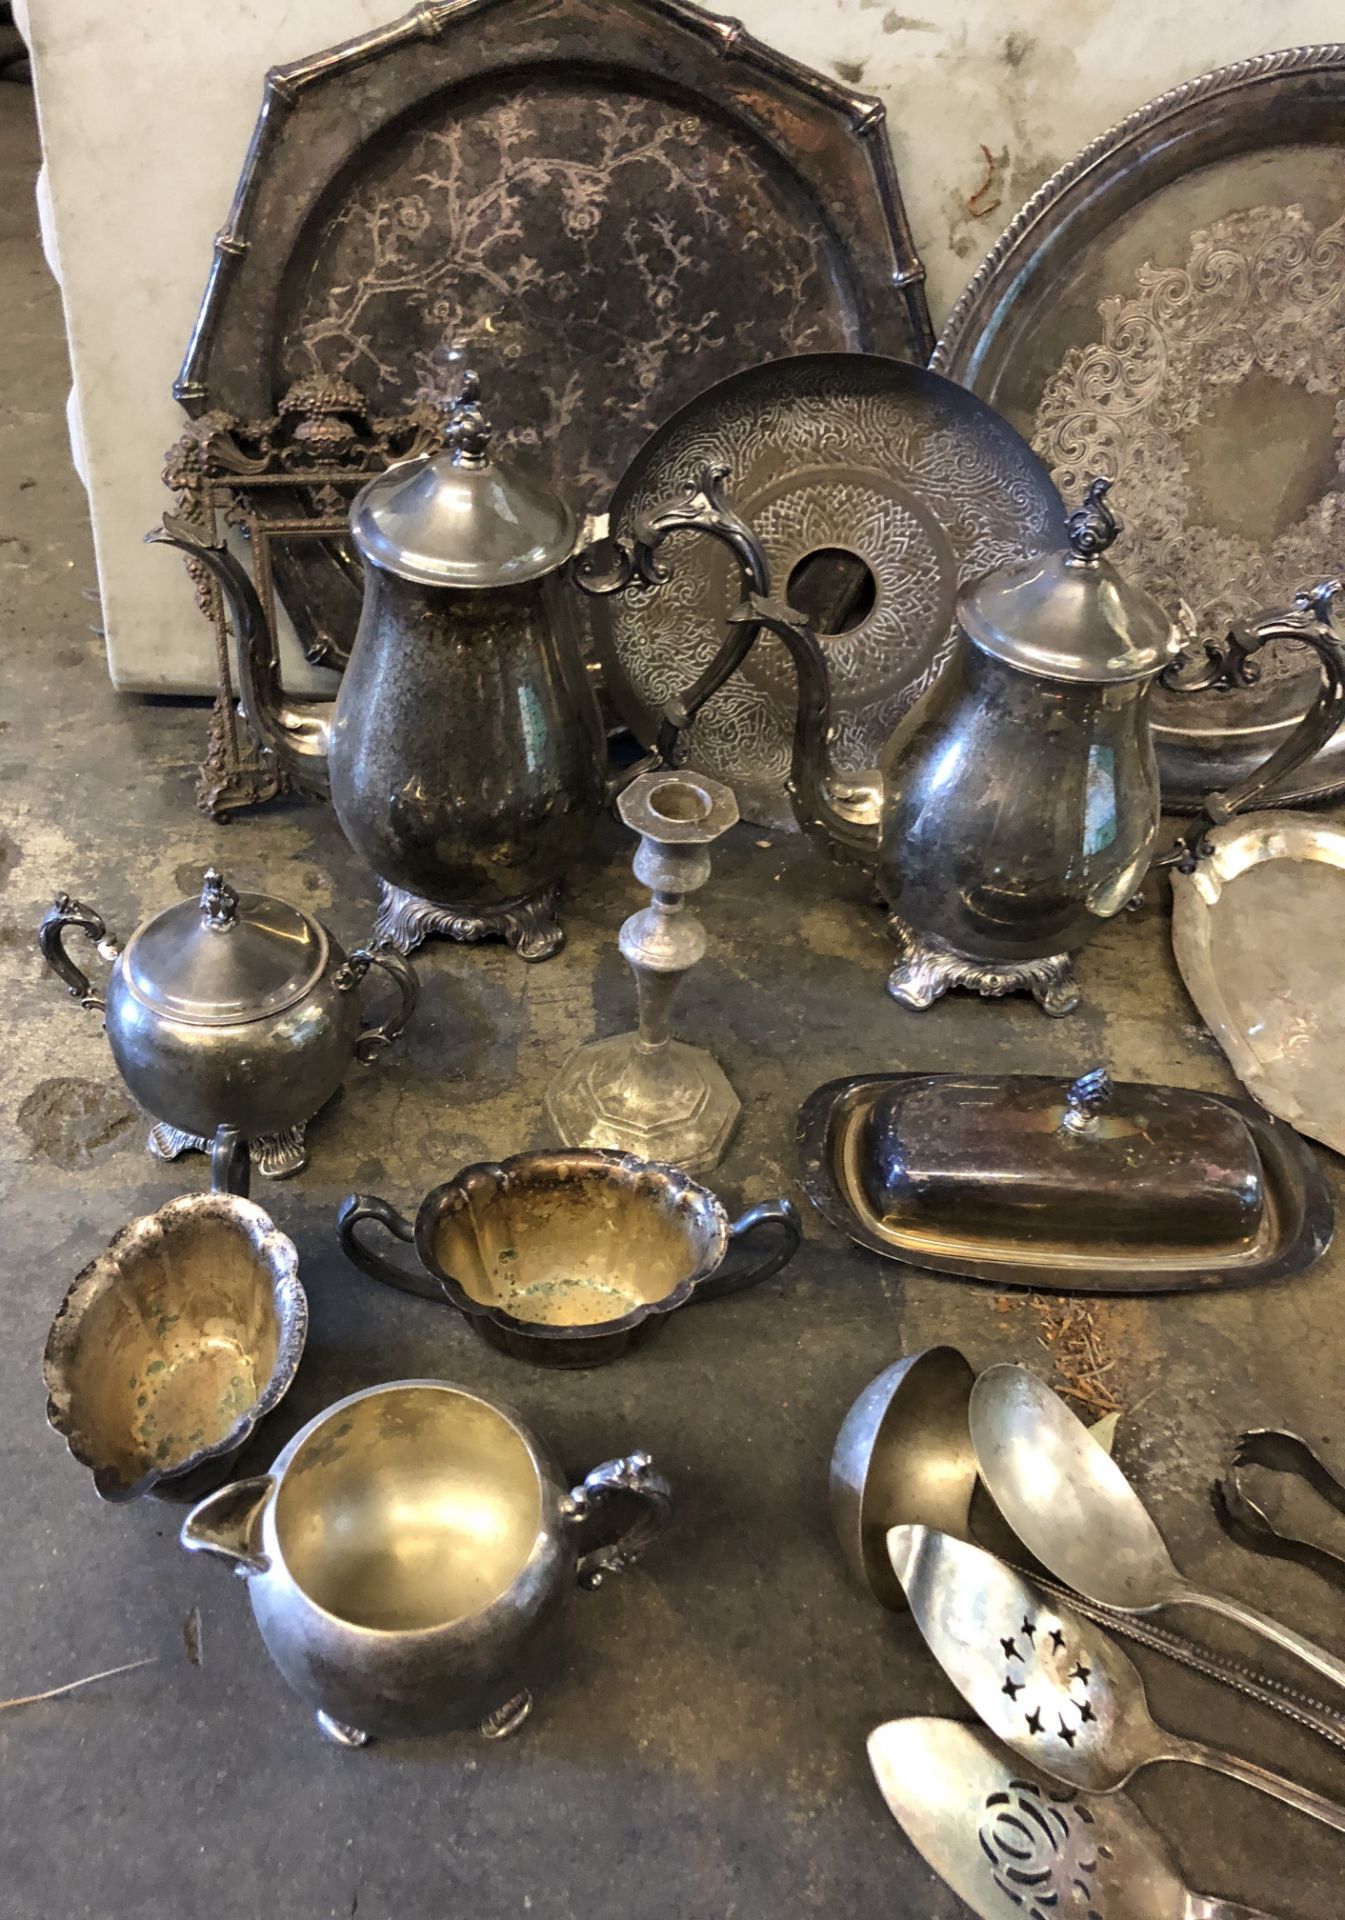 LARGE ANTIQUE, SILVER, SILVER PLATED SERVING TRAYS AND MISC SILVER PLATED OR SILVER ITEMS - Image 2 of 4